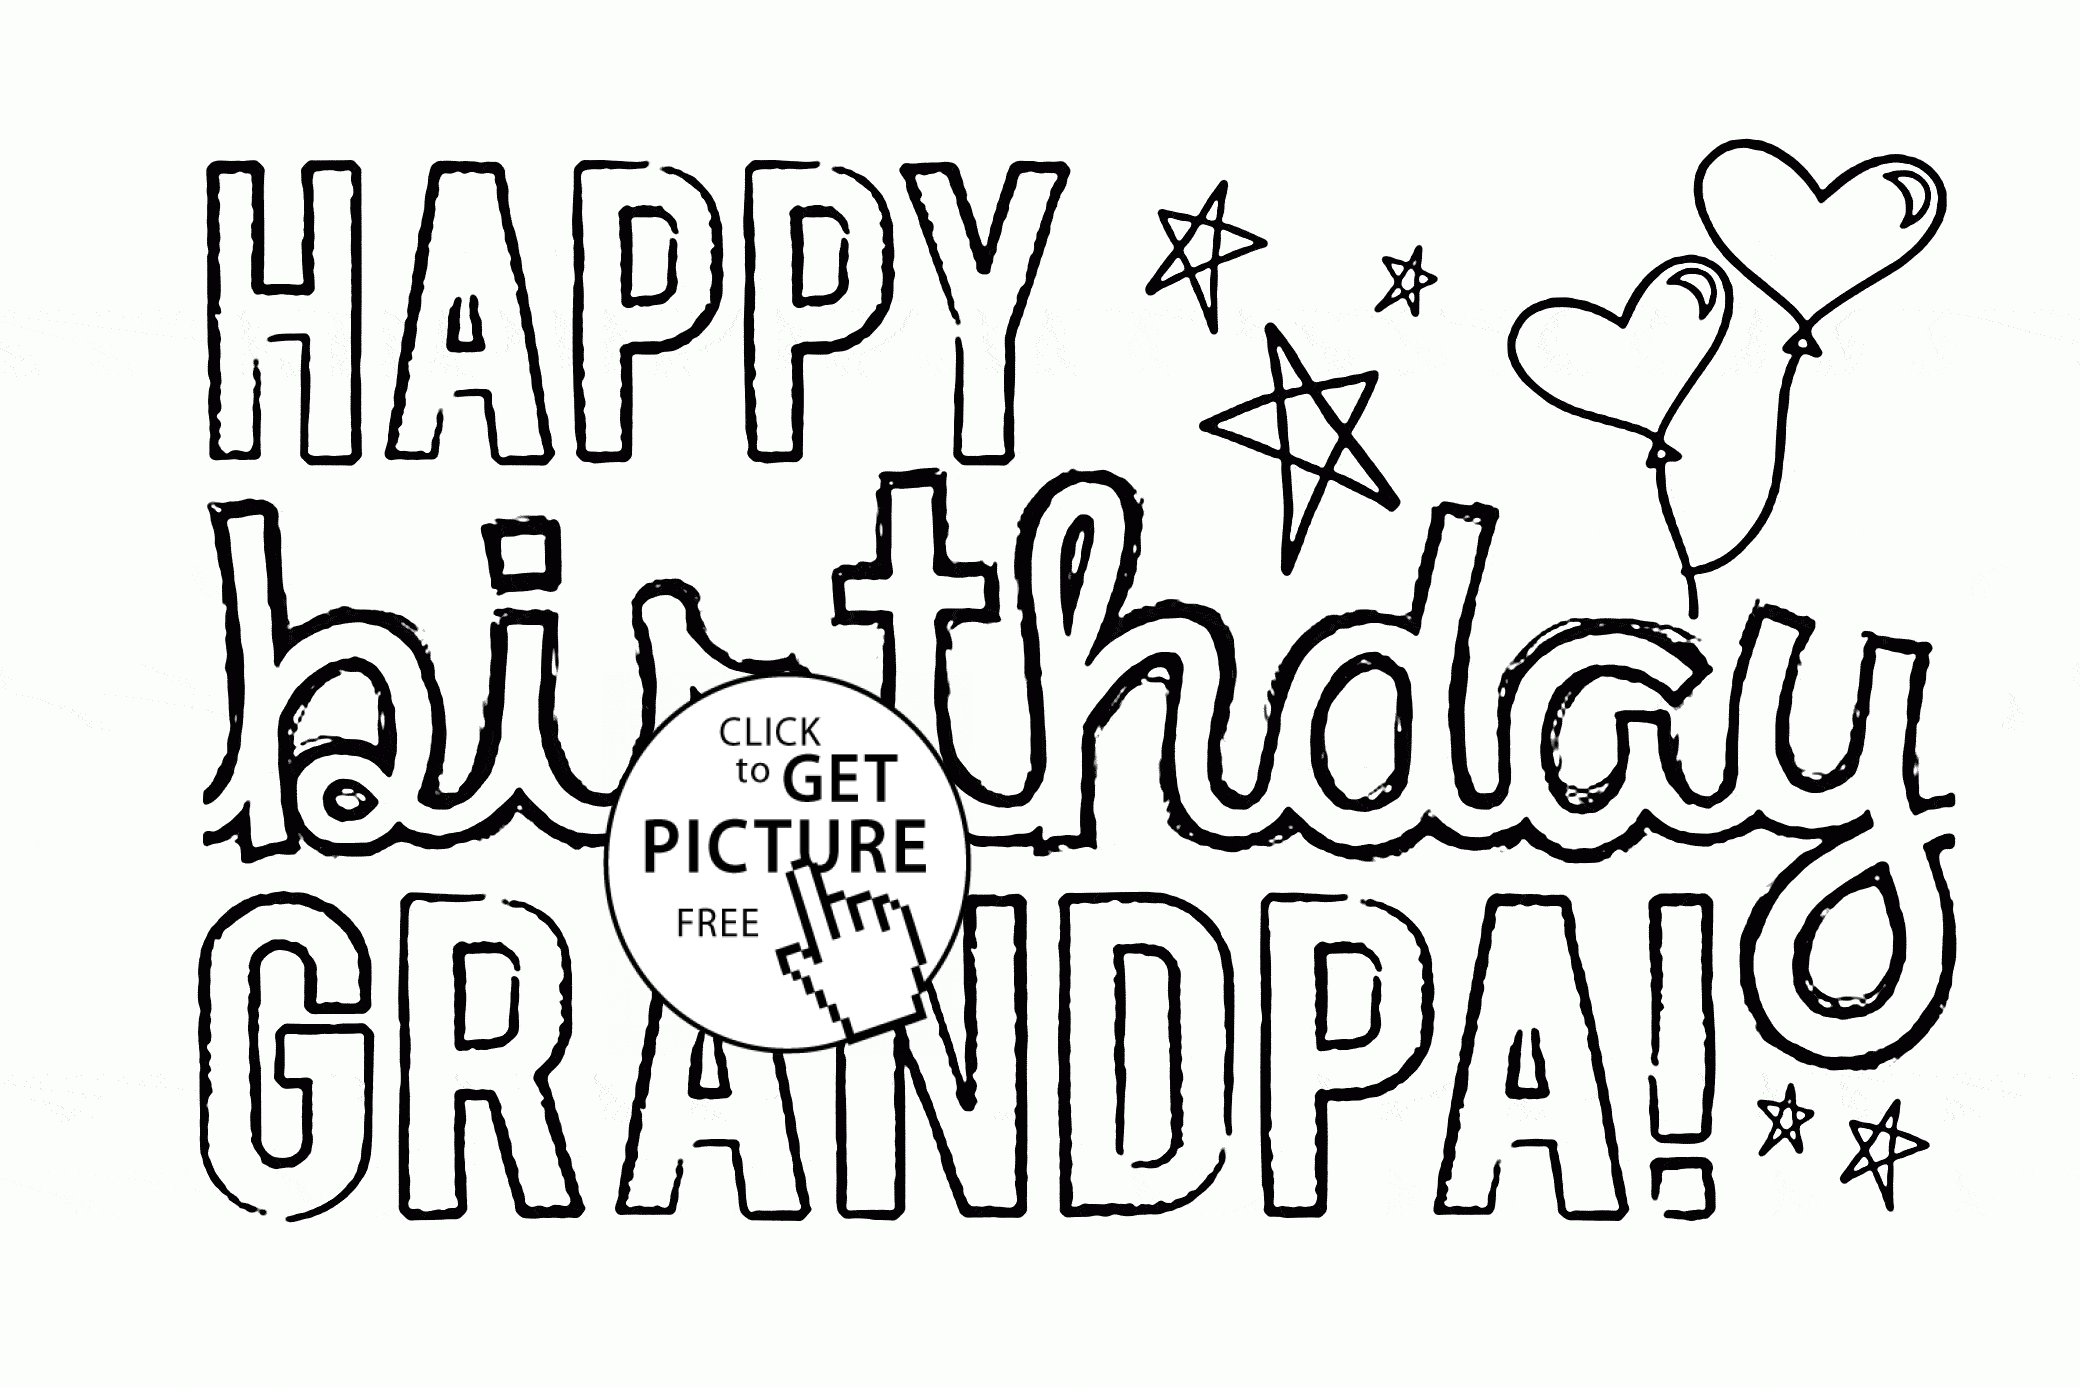 Happy birthday grandpa coloring page for kids holiday coloring pages printables free